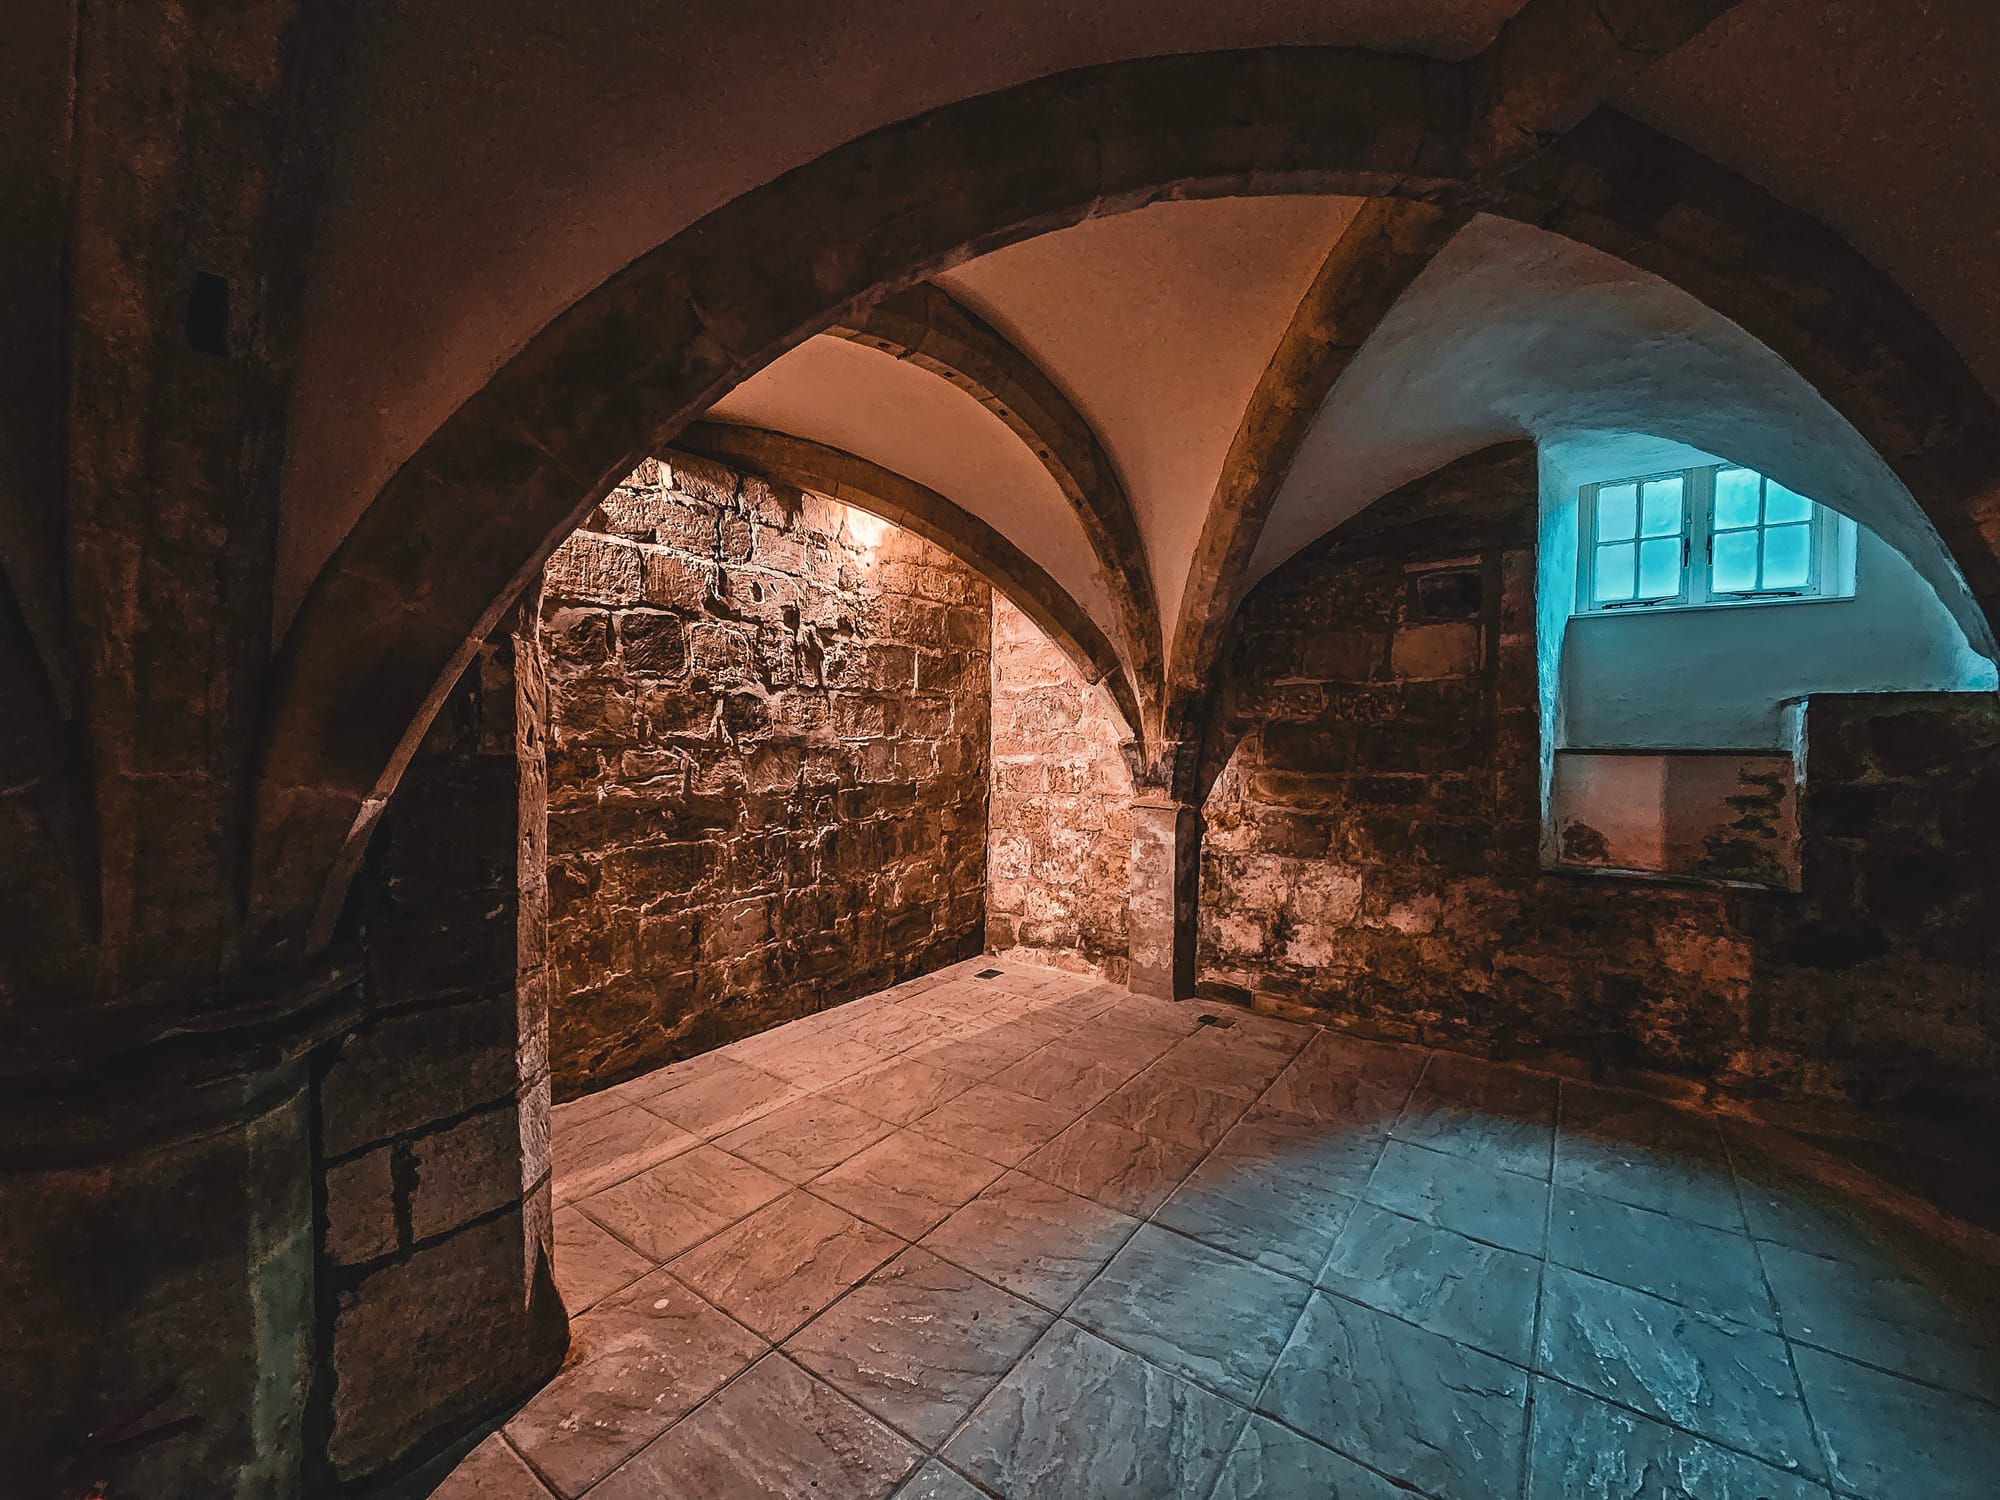 Secrets of Stone, Staffordshire: Exploring the Hidden Underground Remains of a Medieval Priory